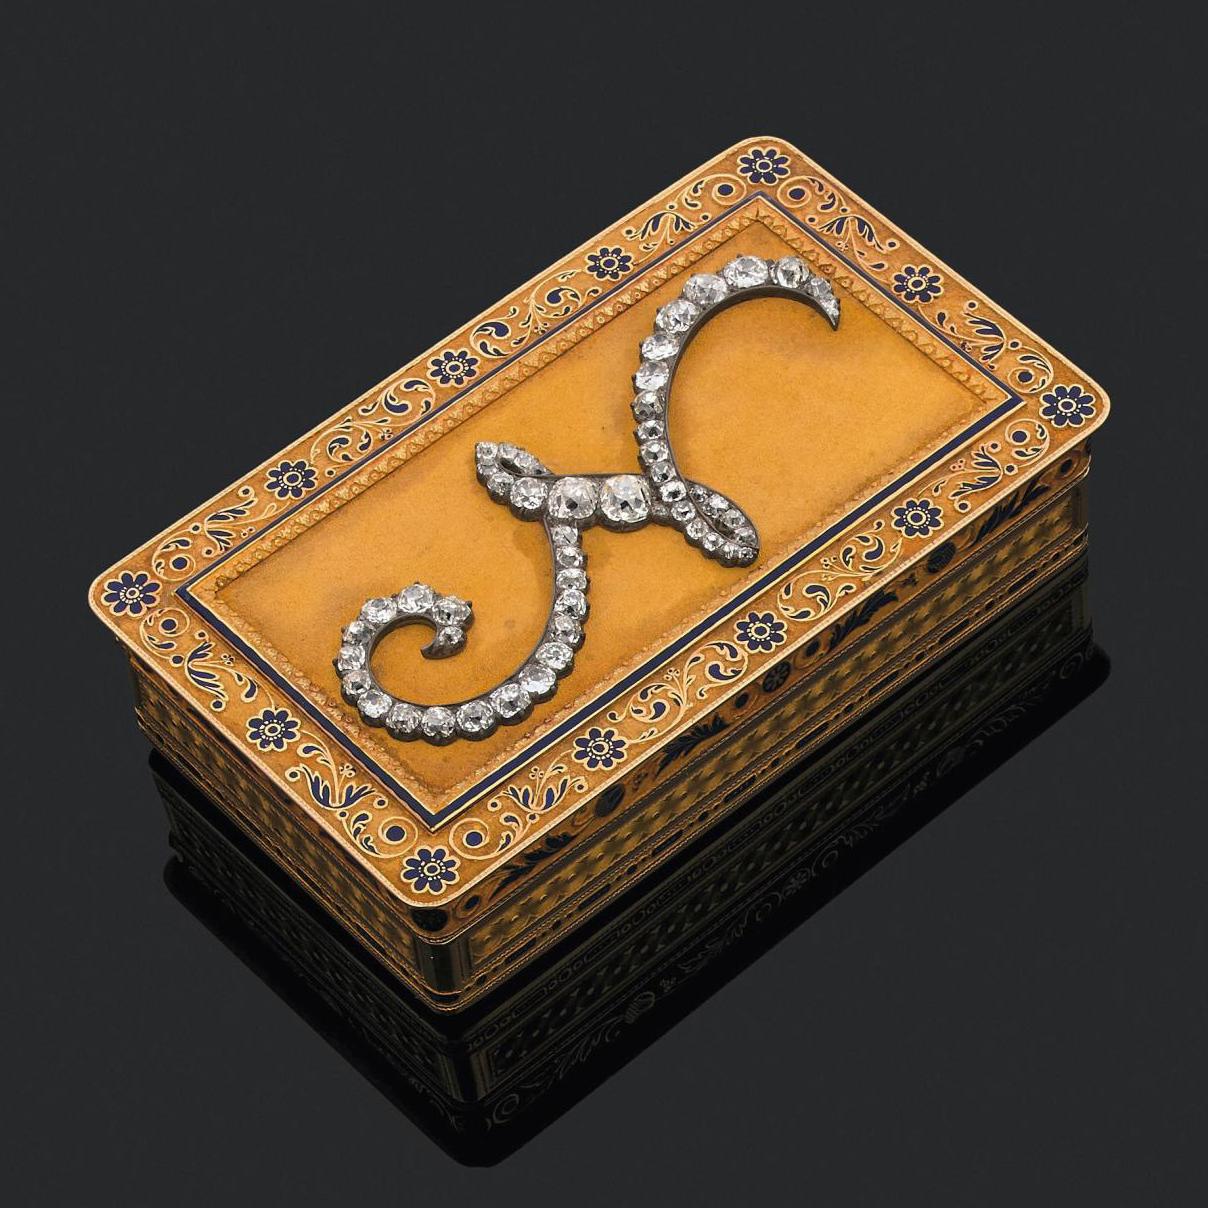 Not Just a Snuffbox: A Gift from Napoleon I